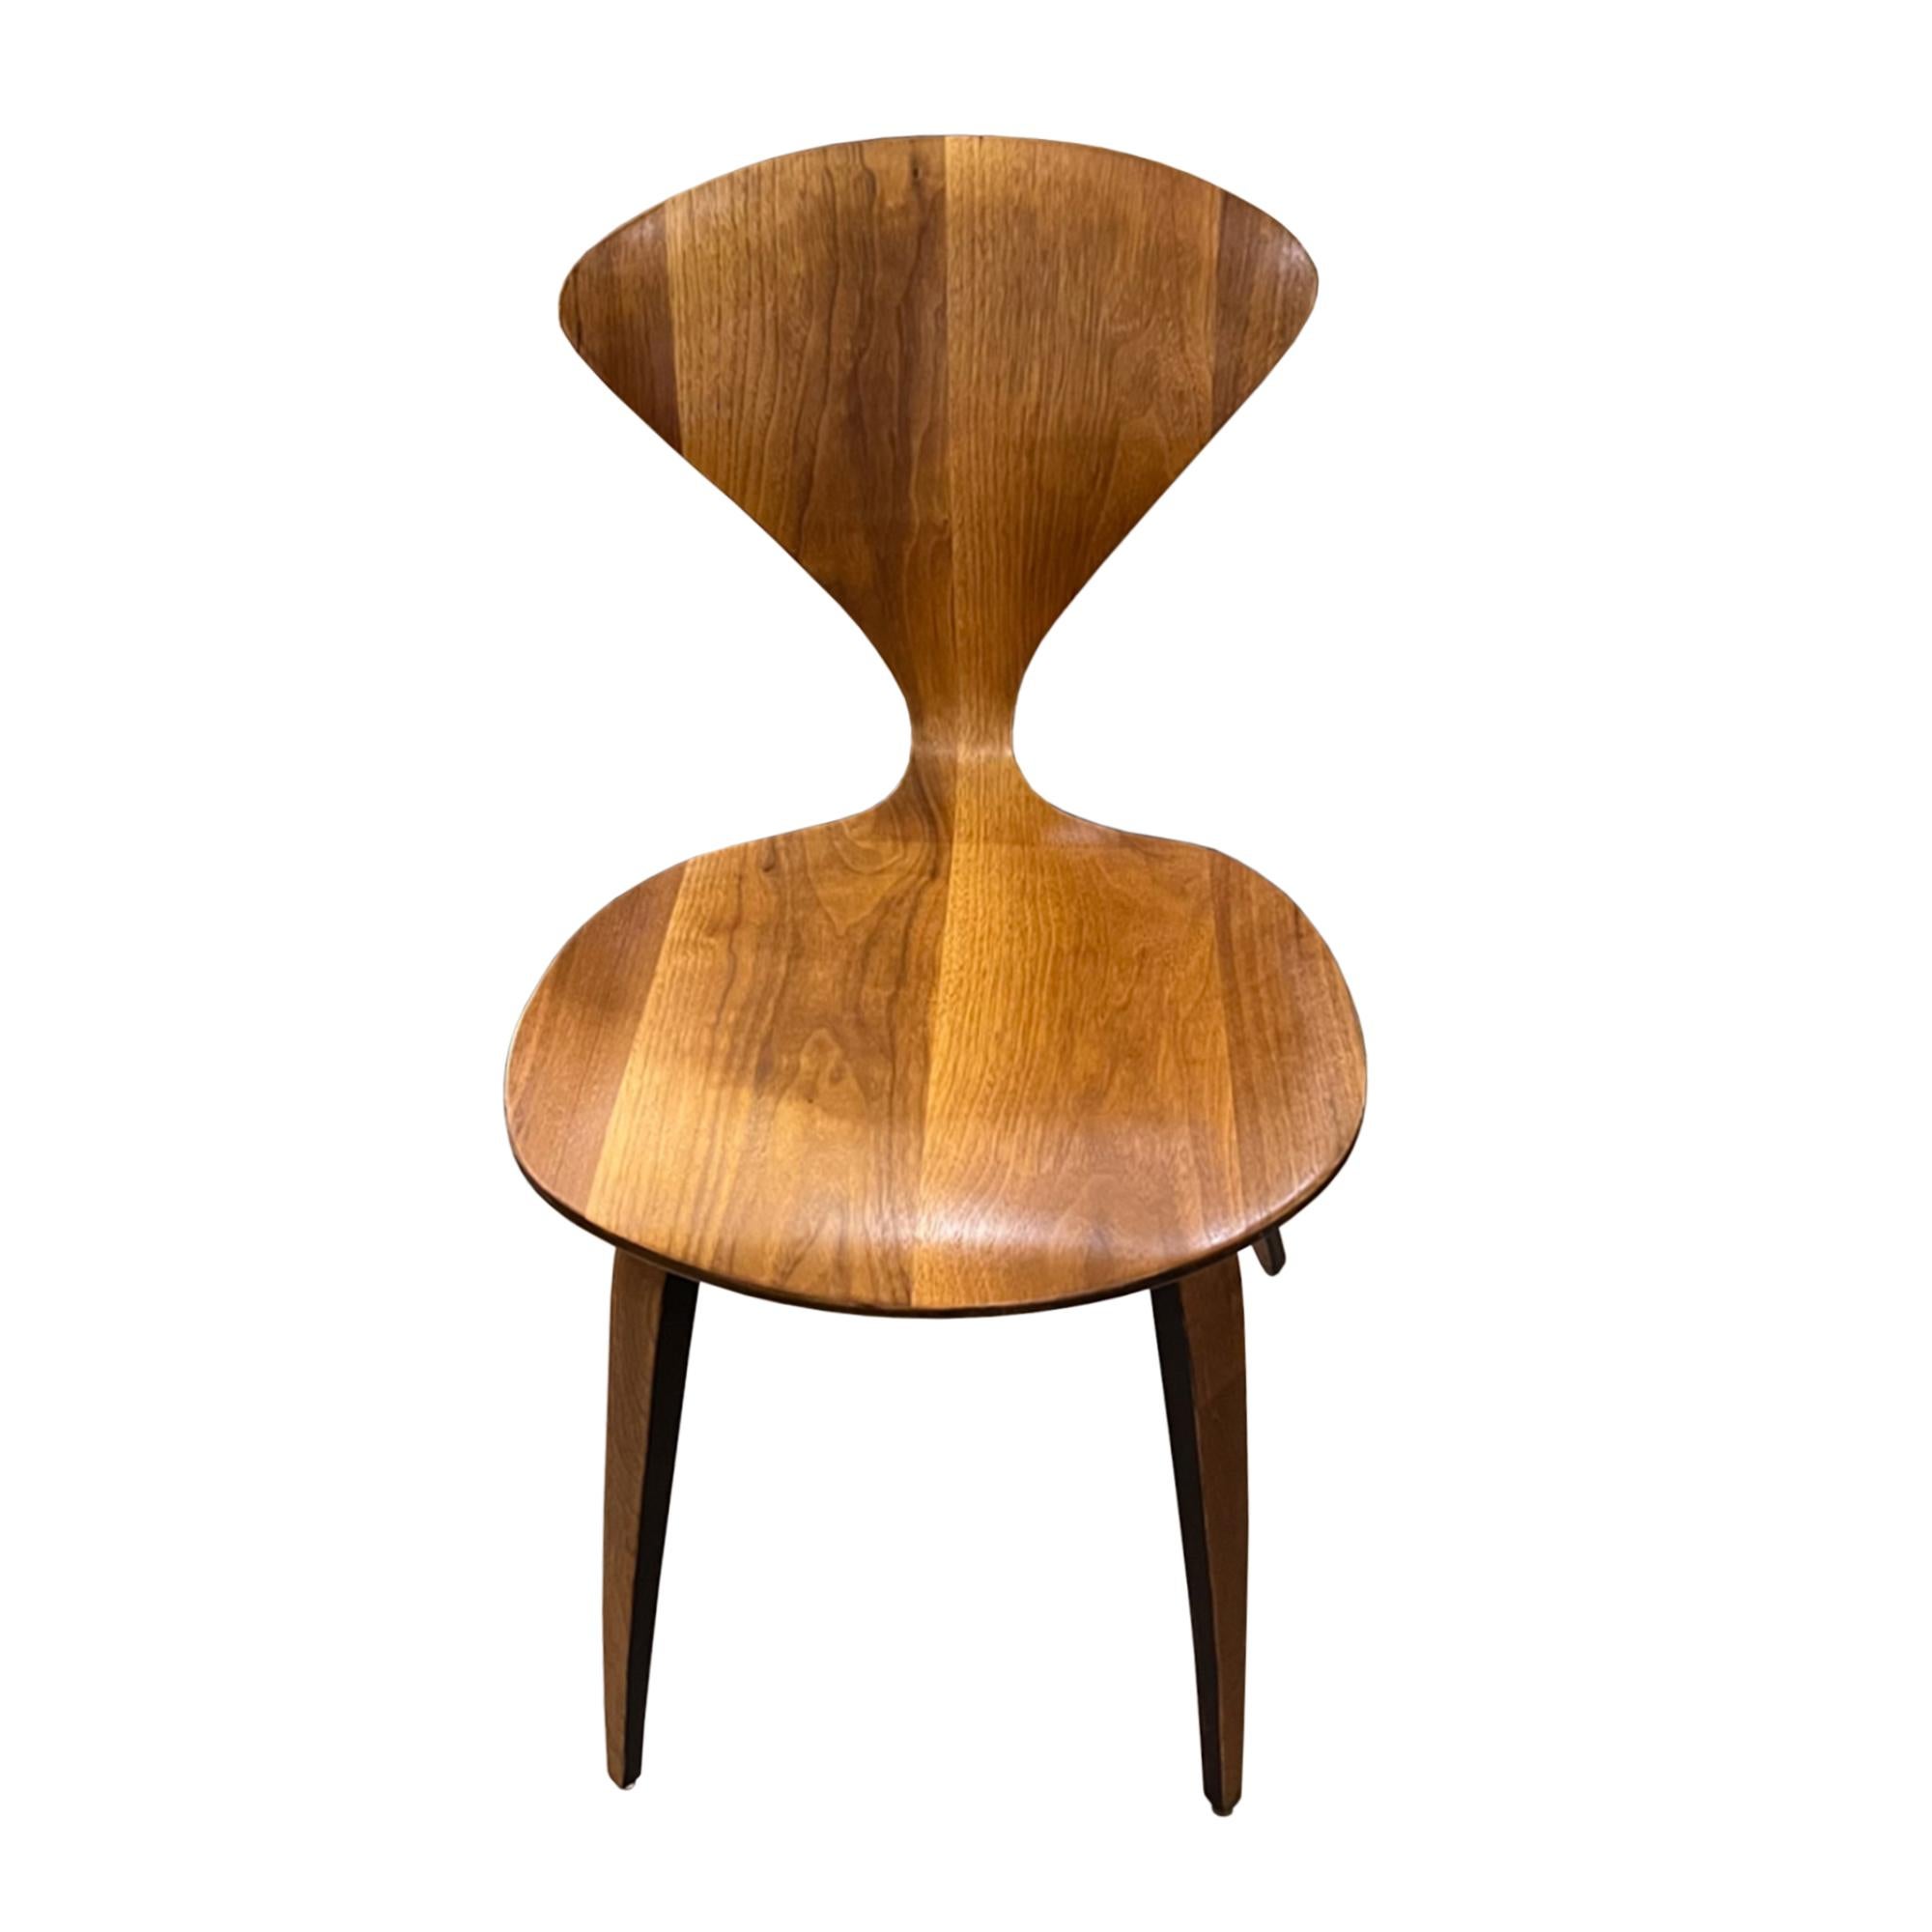 This is a walnut veneered plywood chair made by the Cherner Chair Company in the United States. A classic modern design, featuring the 'wasp waist' silhouette.

A decorative and practical chair for any room - we have placed it with a dressing table